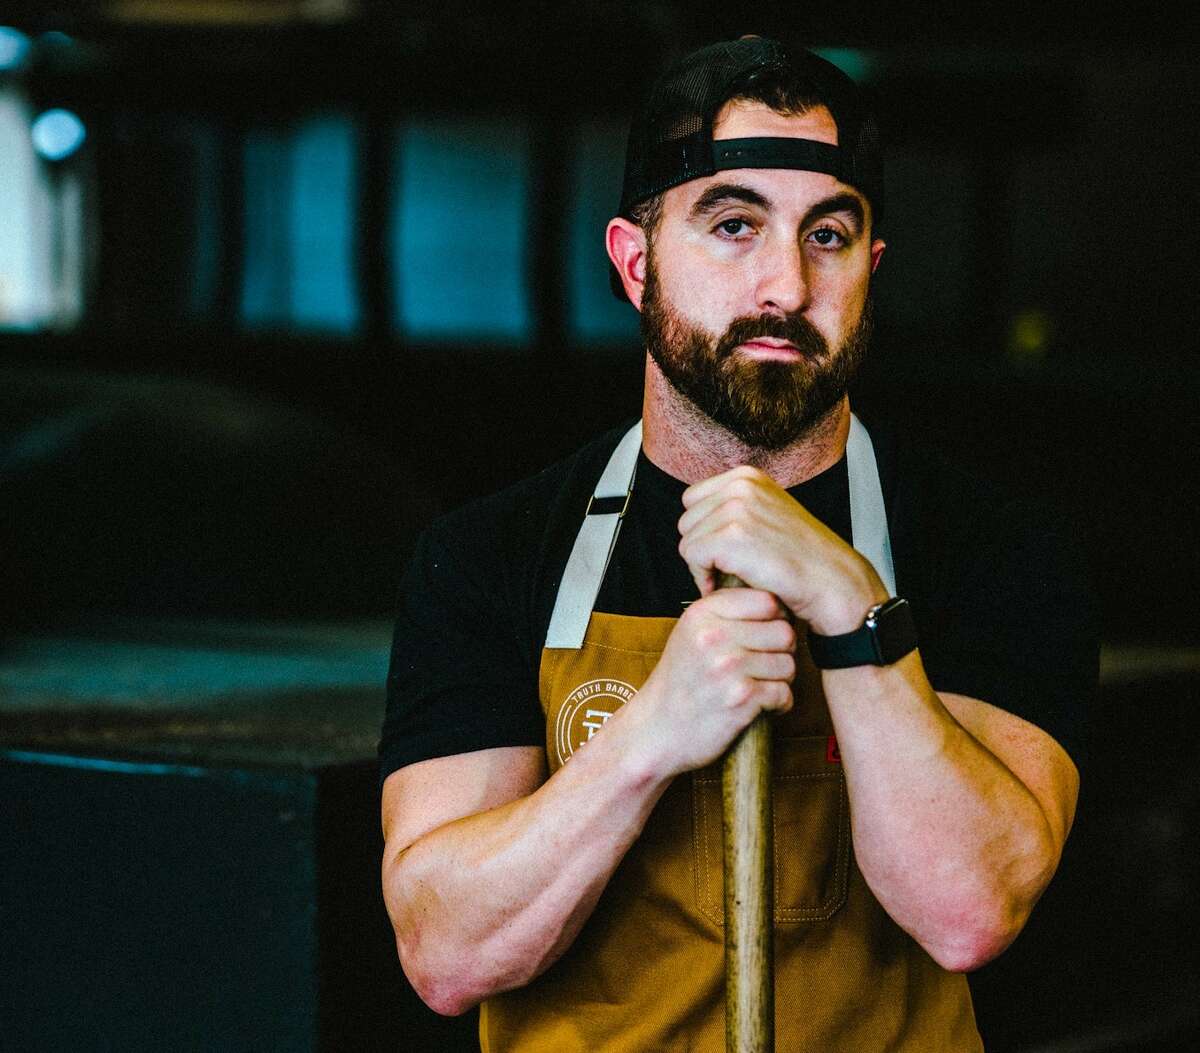 Pitmaster Leonard Botello IV of Truth BBQ will collaborate with chef Aaron Bludorn of Bludorn restaurant for a special dinner for Ukrainian relief on May 12.